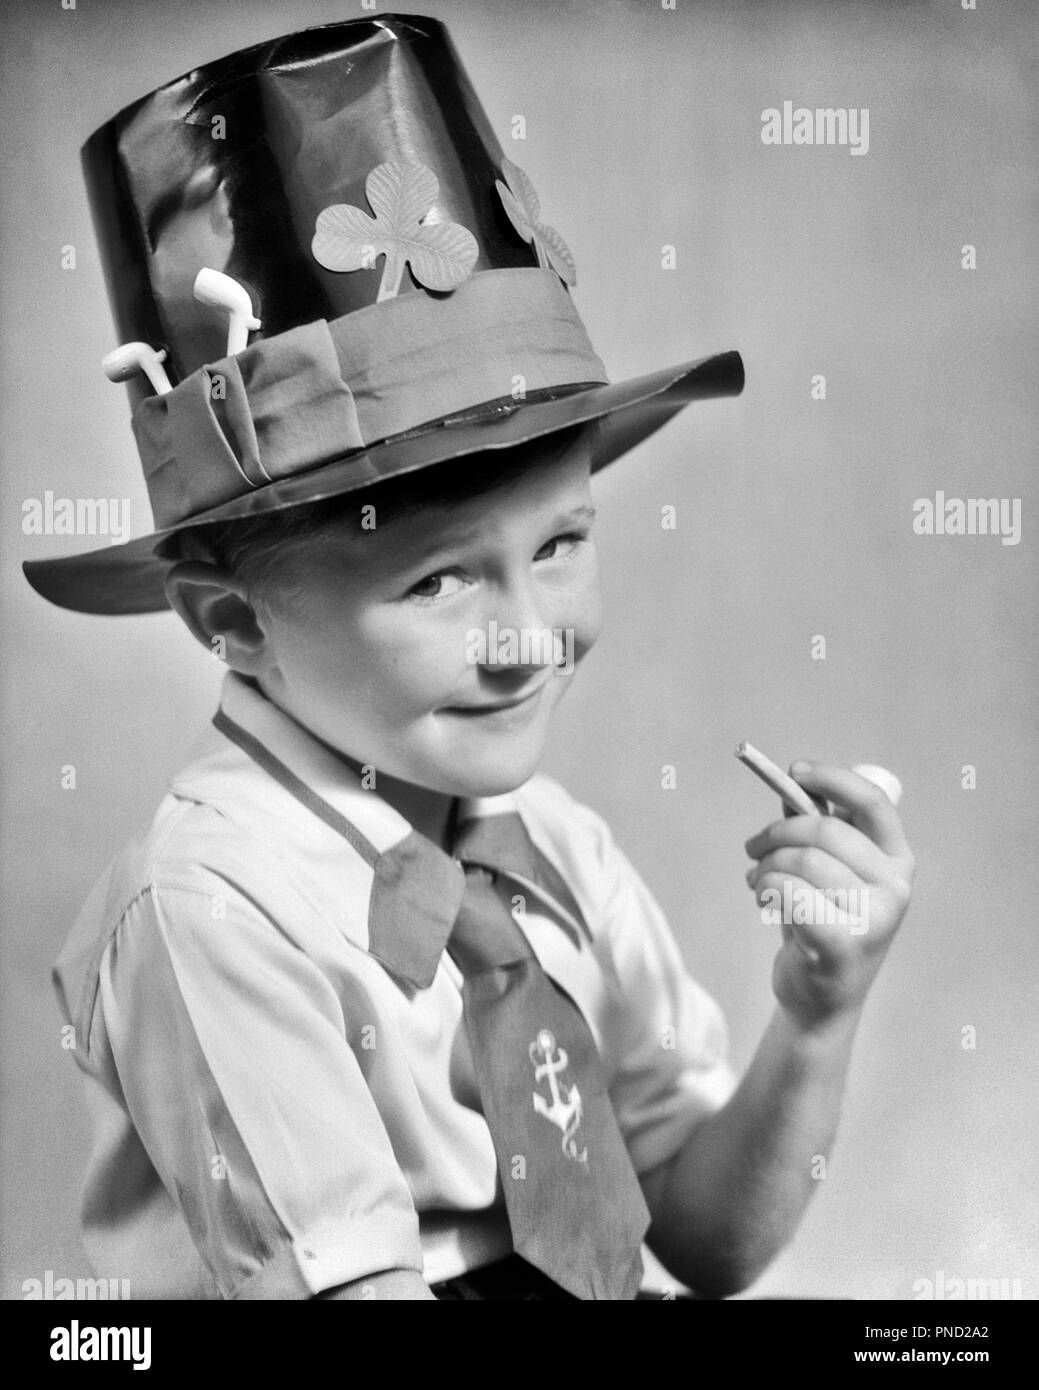 1930s IMPISH YOUNG IRISH LAD SMILING LOOKING AT CAMERA WEARING TOP HAT DECORATED WITH SHAMROCKS HOLDING TRADITIONAL CLAY PIPE  - j6719 HAR001 HARS HALF-LENGTH INSPIRATION IRELAND TRADITIONAL CHARACTER MALES CONFIDENCE DECORATED EXPRESSIONS B&W EYE CONTACT SHAMROCK HAPPINESS HEAD AND SHOULDERS CHEERFUL CLAY PIPES STRENGTH PRIDE MISCHIEVOUS SMILES CONNECTION CONCEPTUAL JOYFUL STYLISH TYPE IMPISH LITTLE PEOPLE JOKING JUVENILES LEPRECHAUN STEREOTYPE BLACK AND WHITE CAUCASIAN ETHNICITY GAELIC HAR001 ICONIC INNOCENT OLD FASHIONED SHAMROCKS Stock Photo